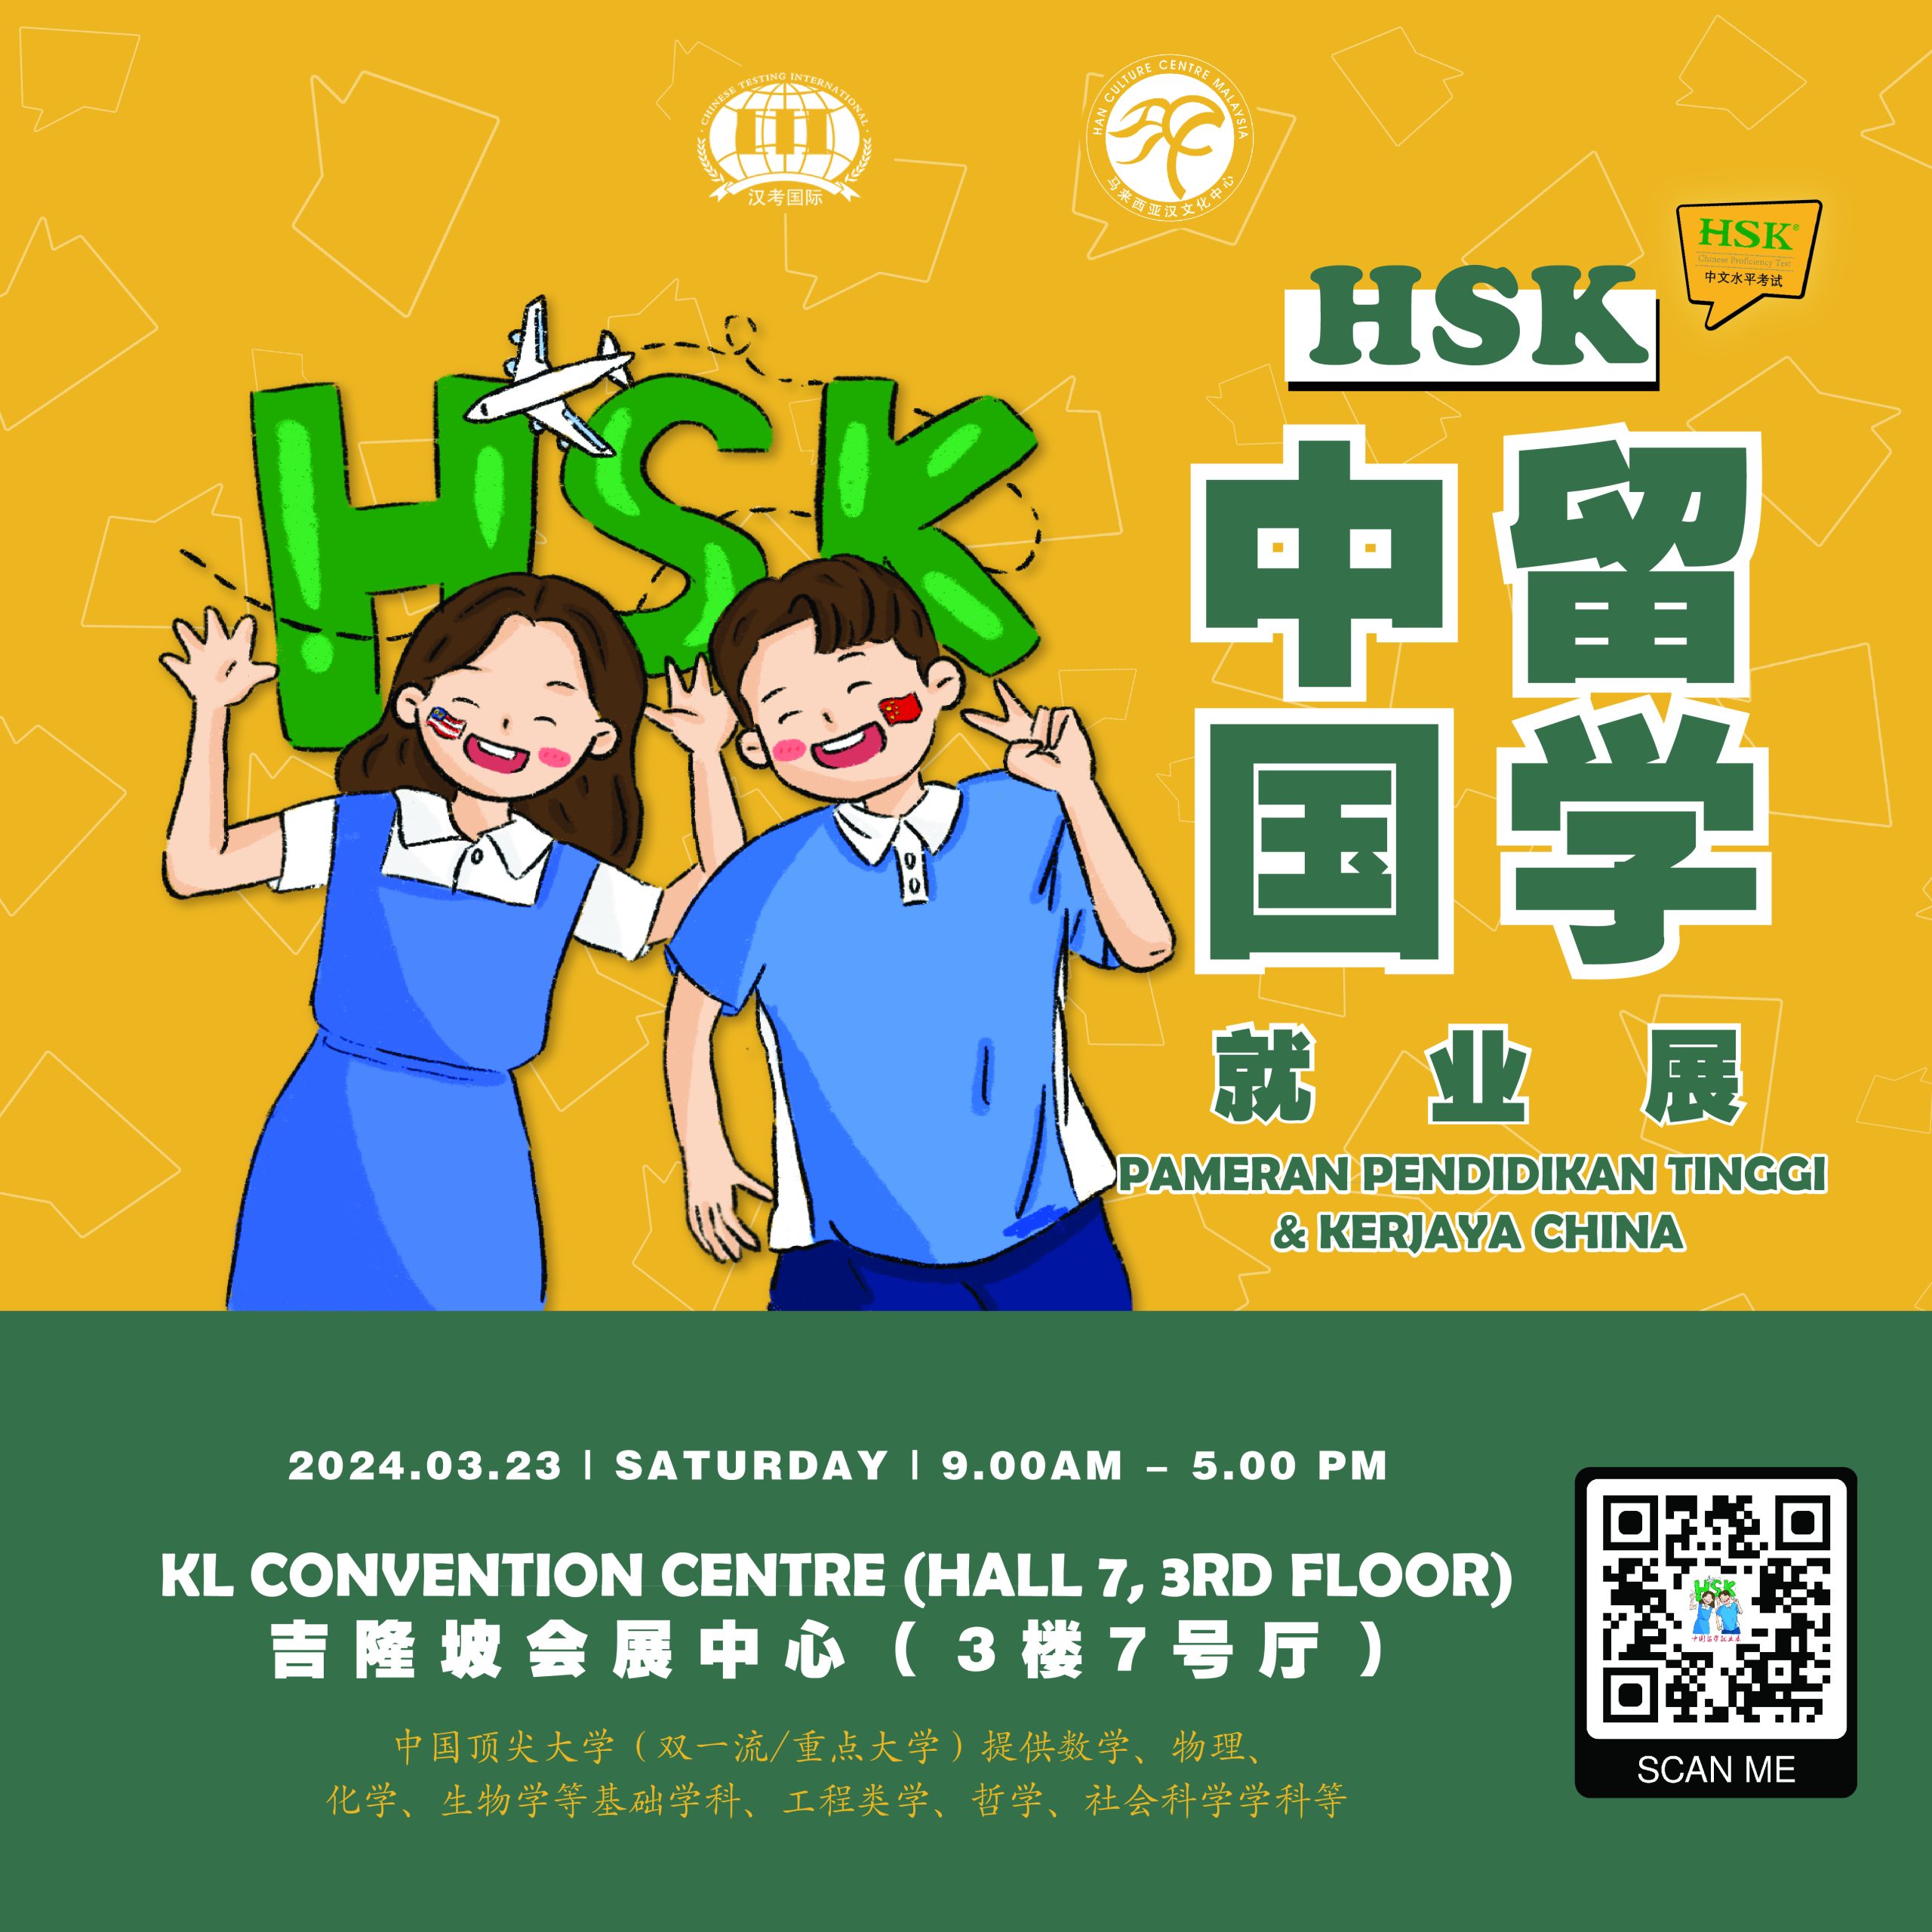 HSK Study in China Education & Career Expo 2024 at Kuala Lumpur Convention Centre